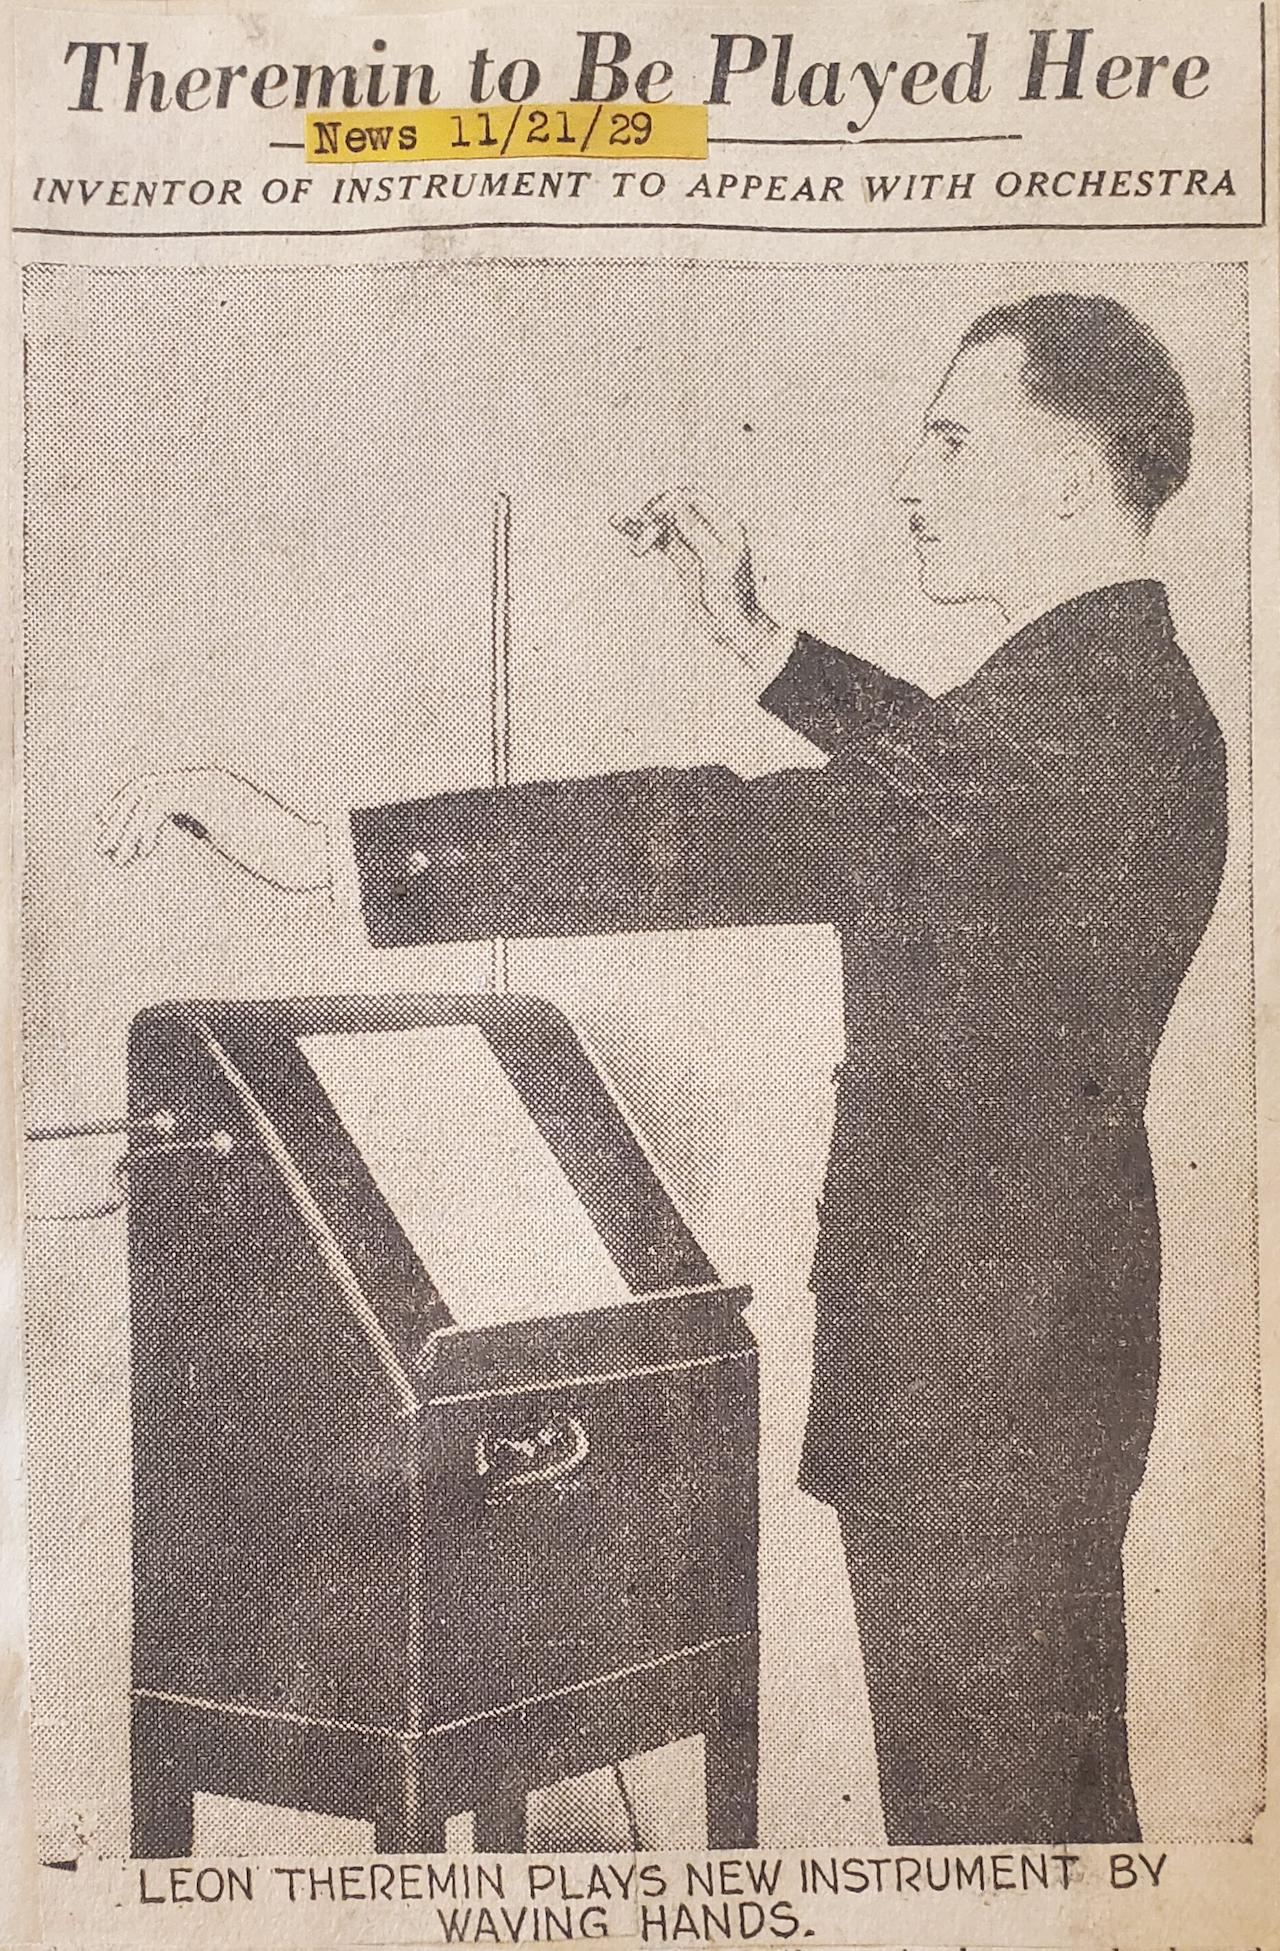 A newspaper clipping advertising Schillinger’s upcoming premiere with The Cleveland Orchestra and Leon Theremin from November 1929.